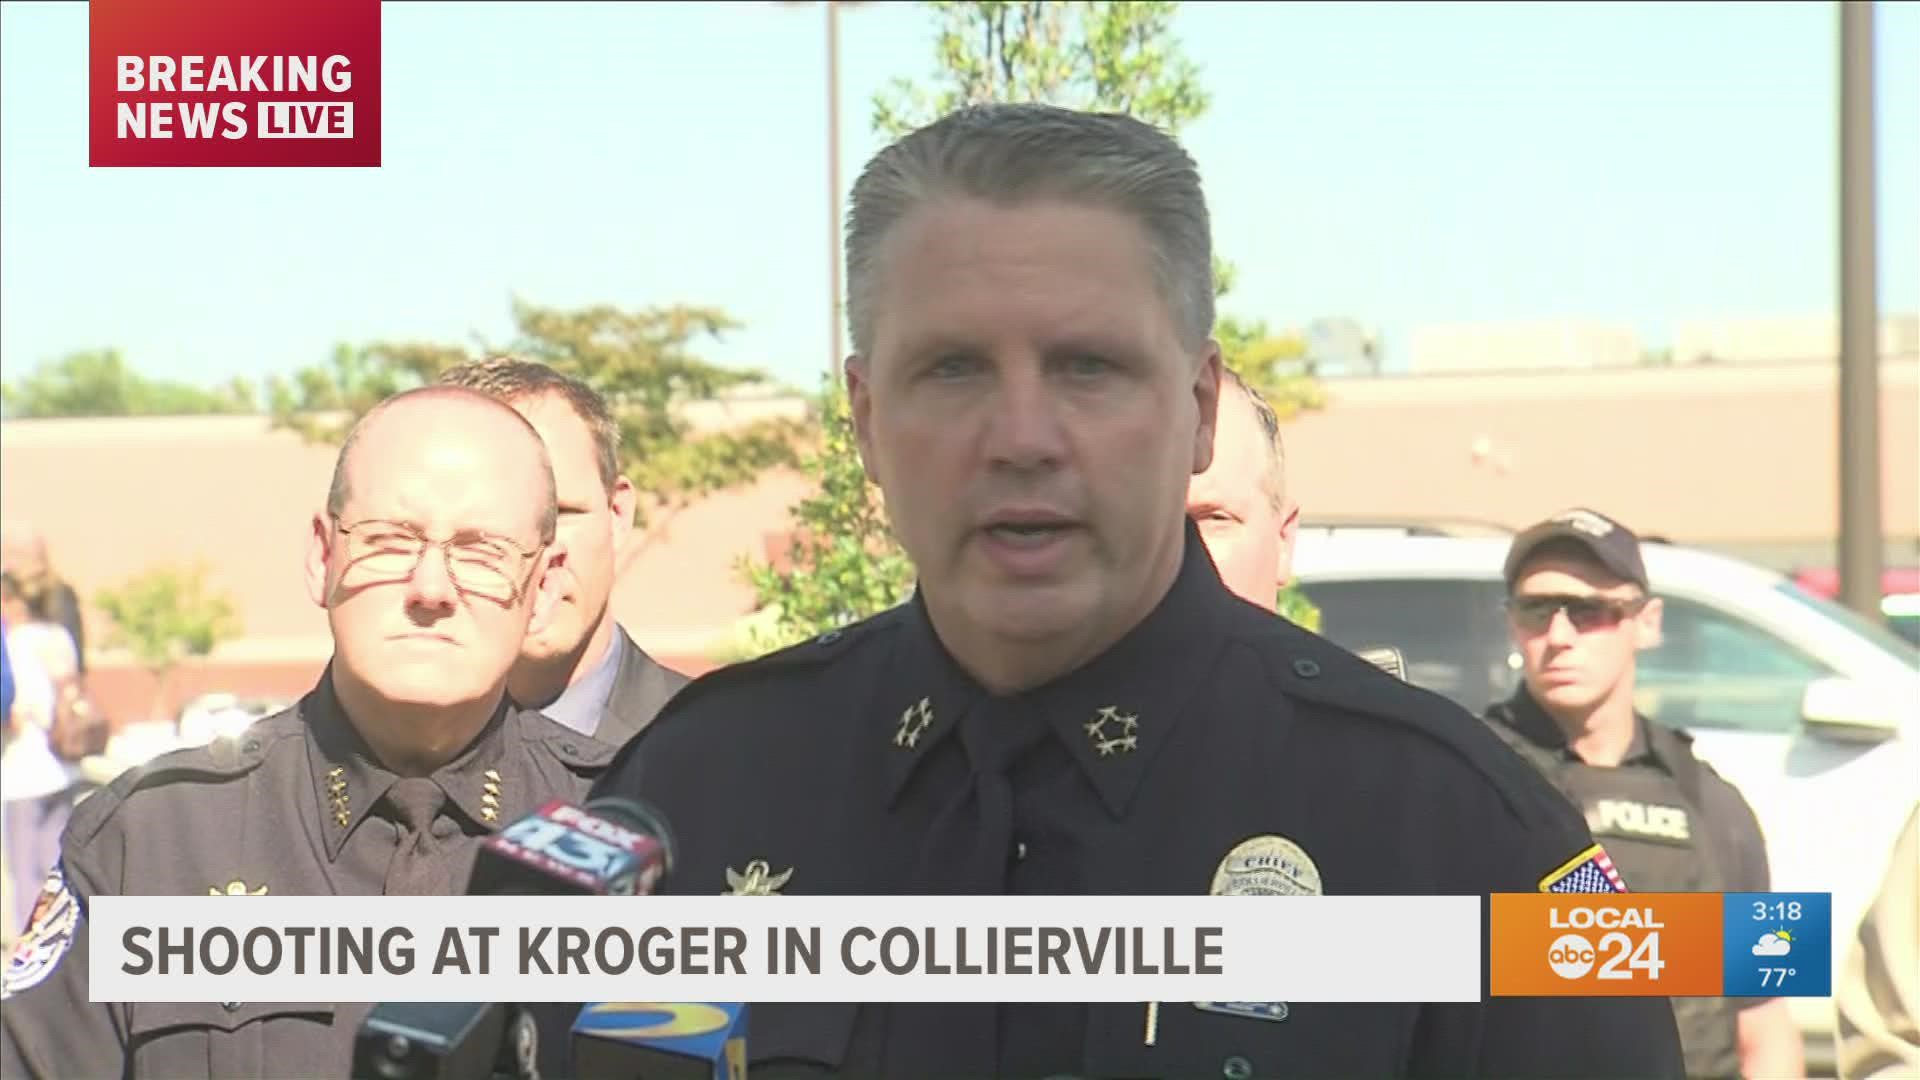 Authorities said 13 people were shot at a Kroger in Collierville, Tenn. The shooter was dead.